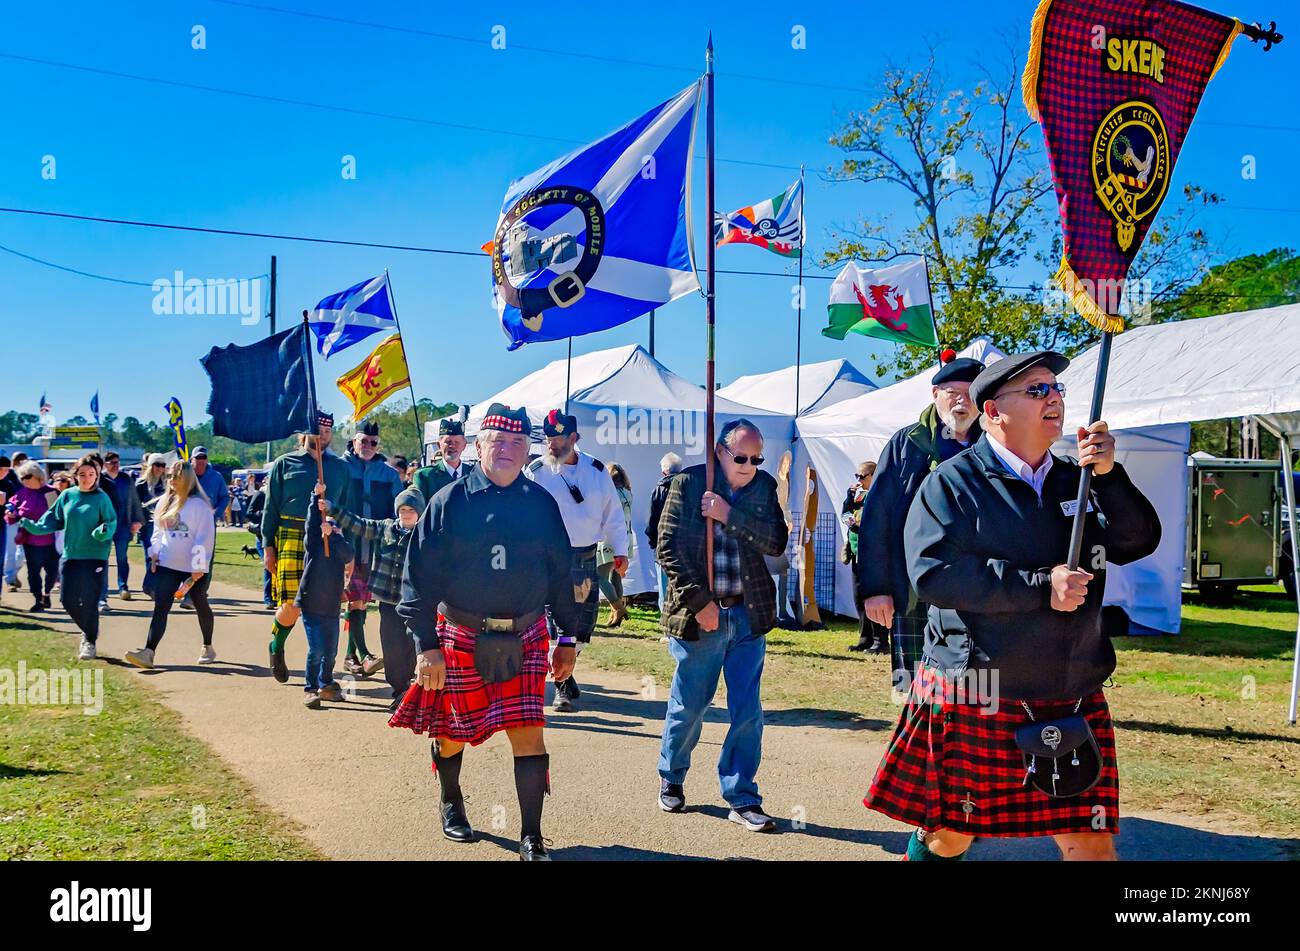 People carry tartan banners during the parade of clan tartans at the annual Celtic Music Festival and Scottish Highland Games in Gulfport, Mississippi. Stock Photo